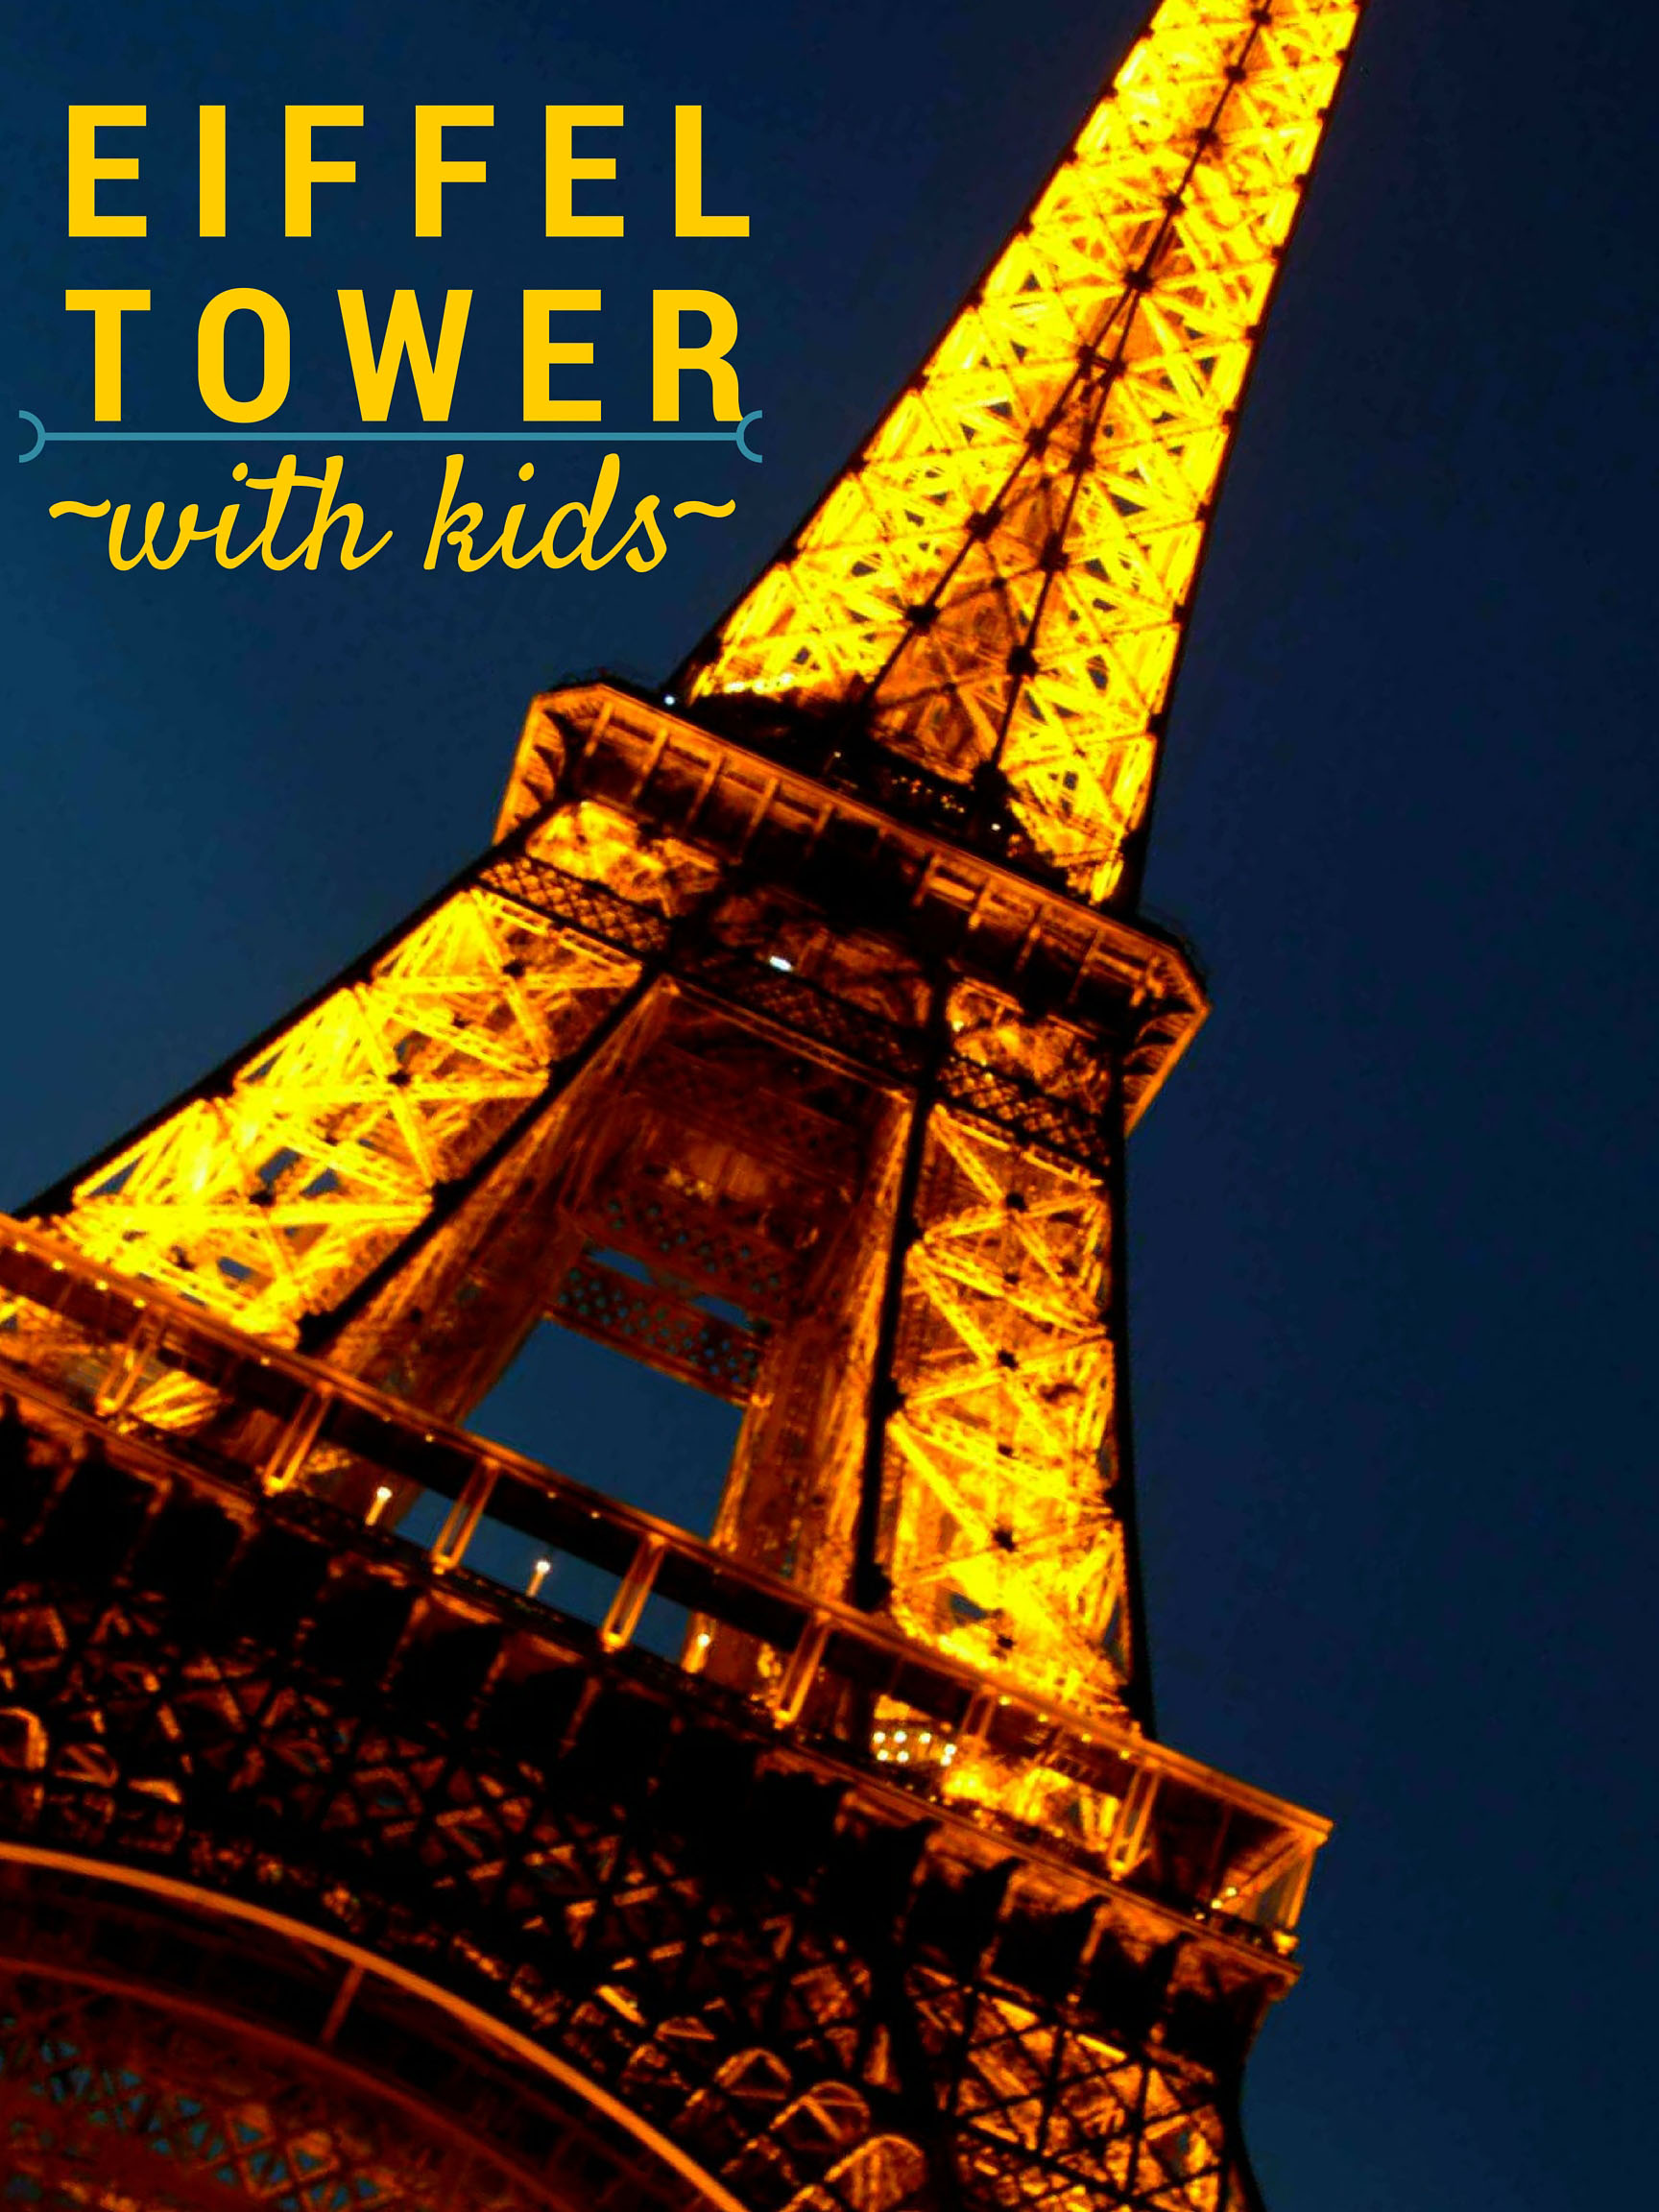 Tips for Visiting the Eiffel Tower with Kids